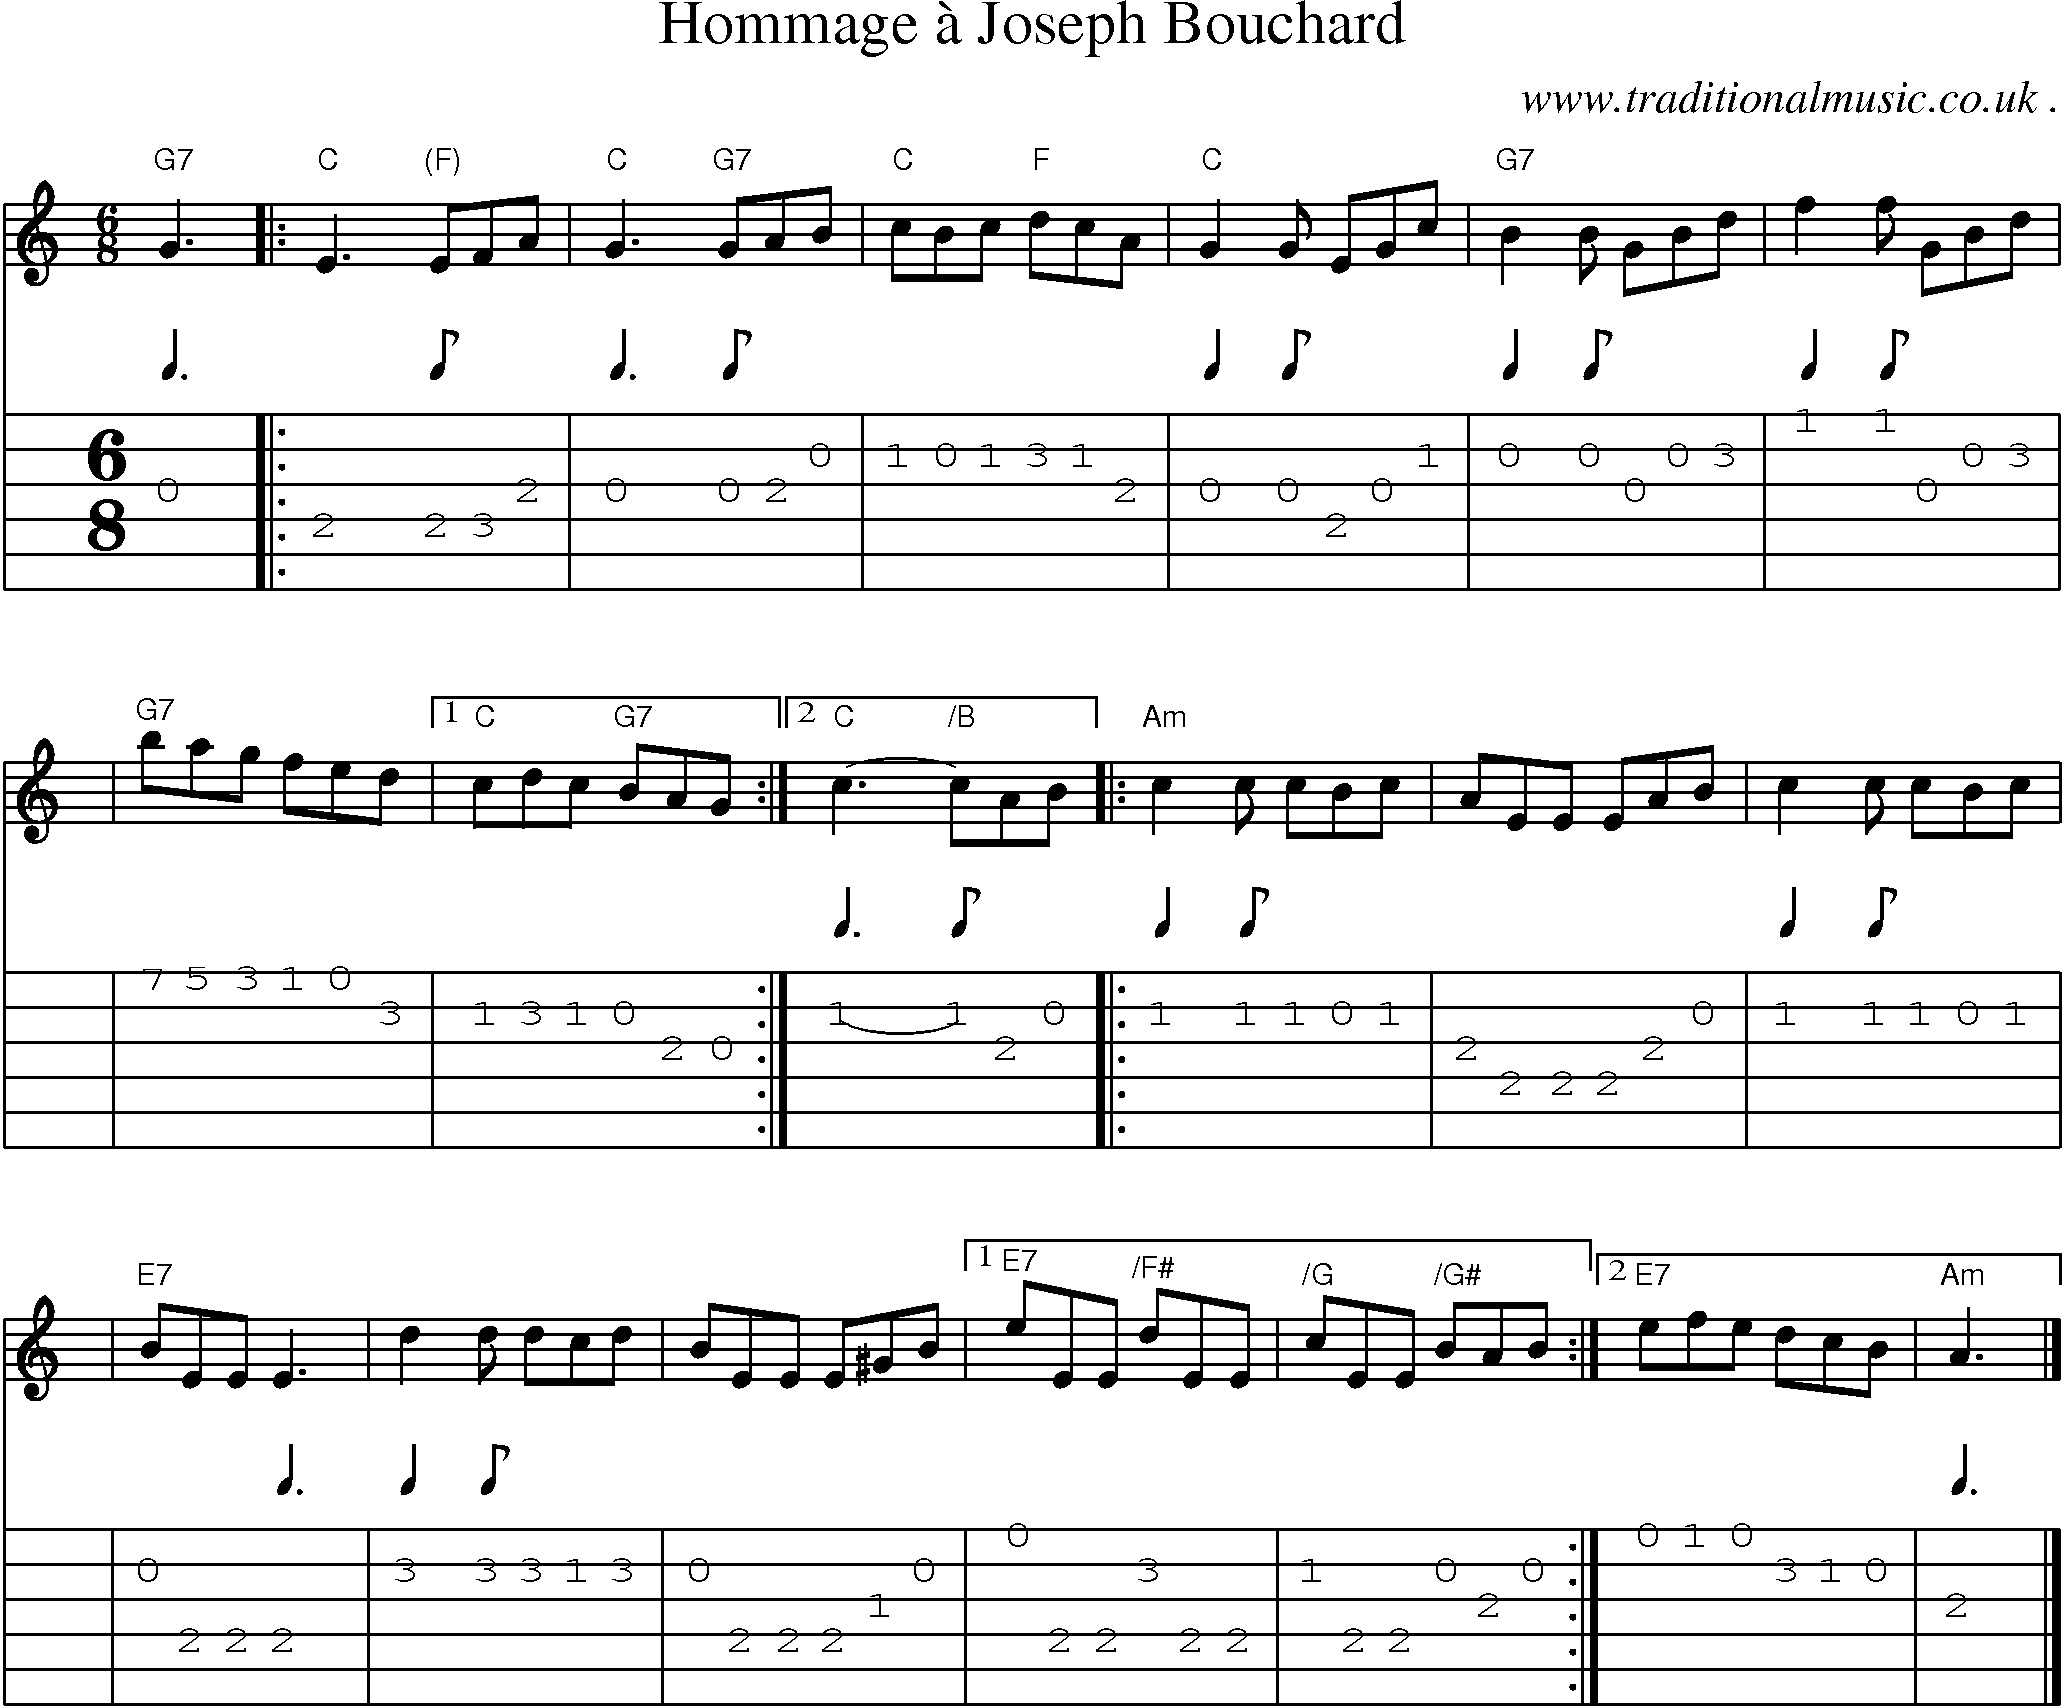 Sheet-music  score, Chords and Guitar Tabs for Hommage A Joseph Bouchard